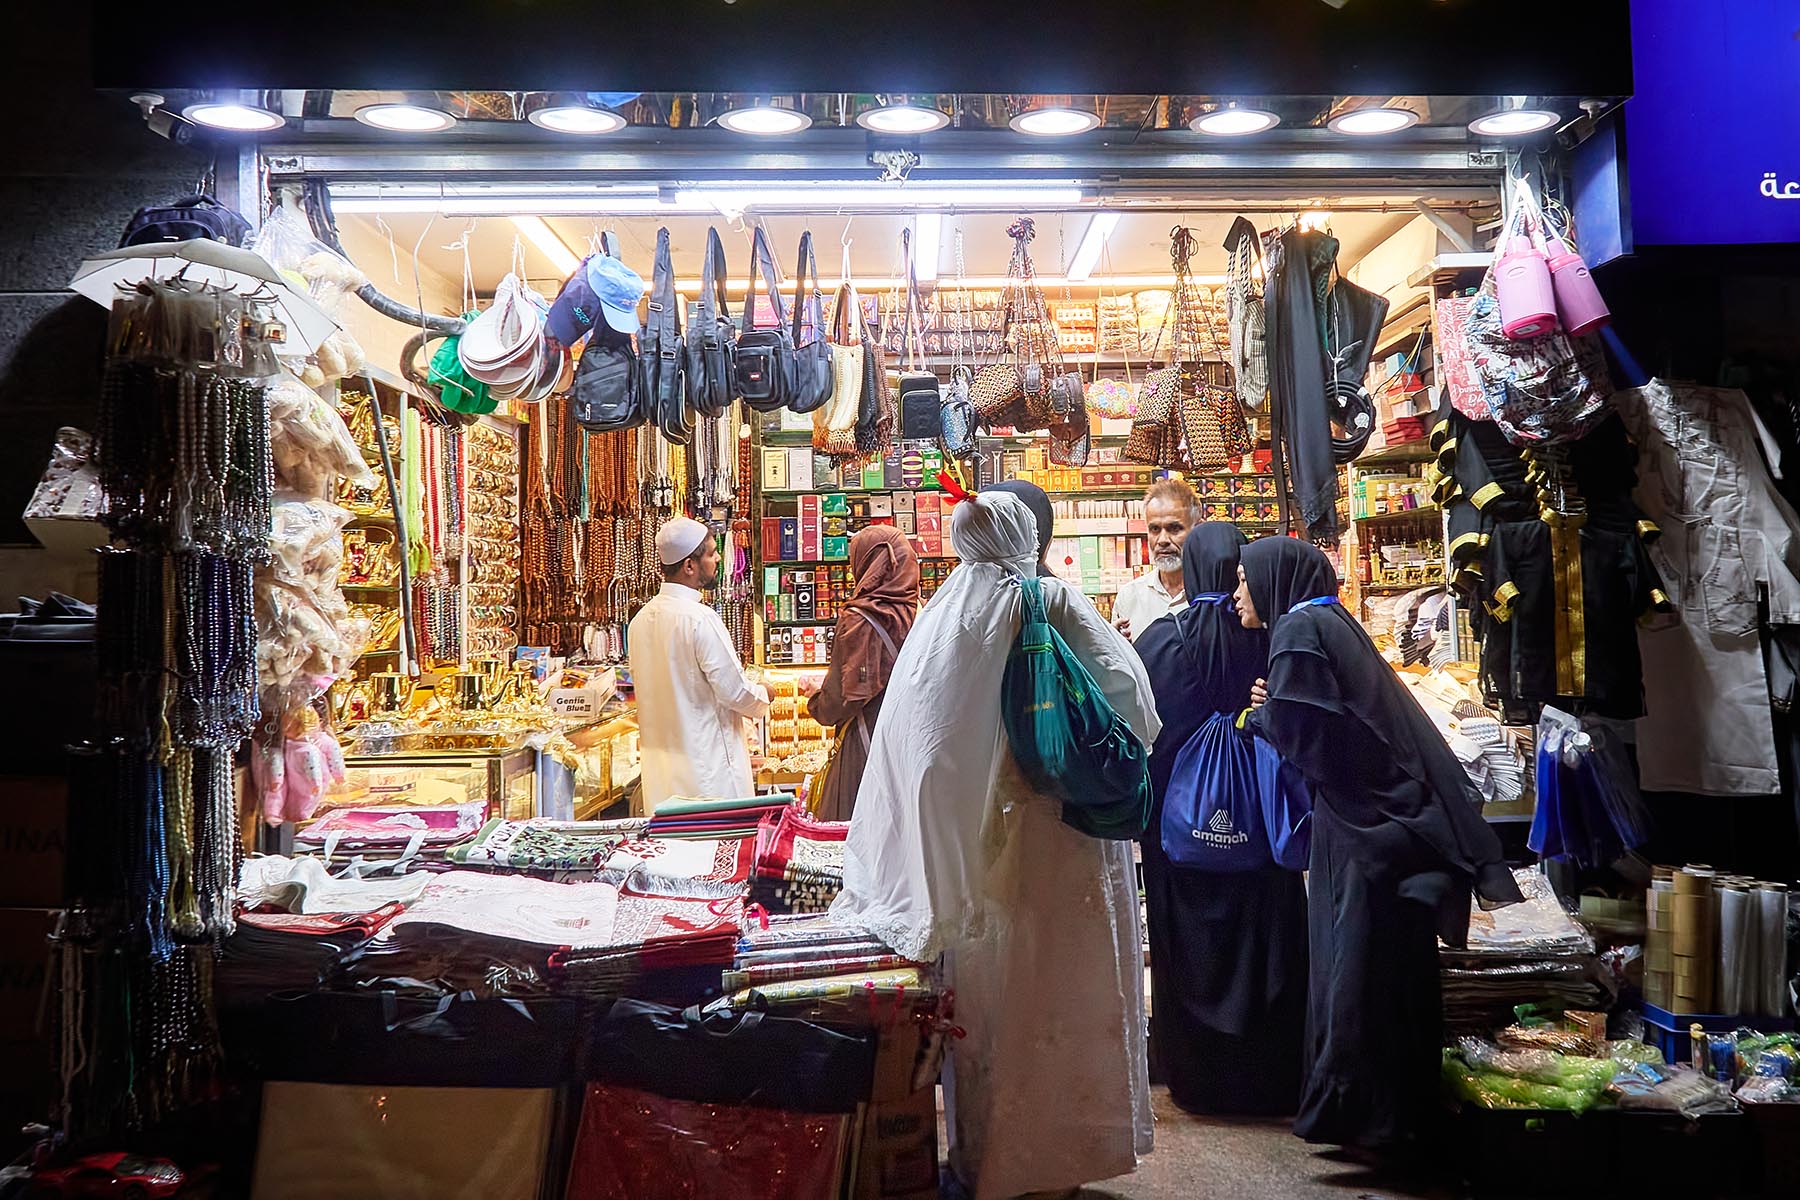 A shop in Makkah with people haggling for price, a common occurrence in Saudi Arabia.